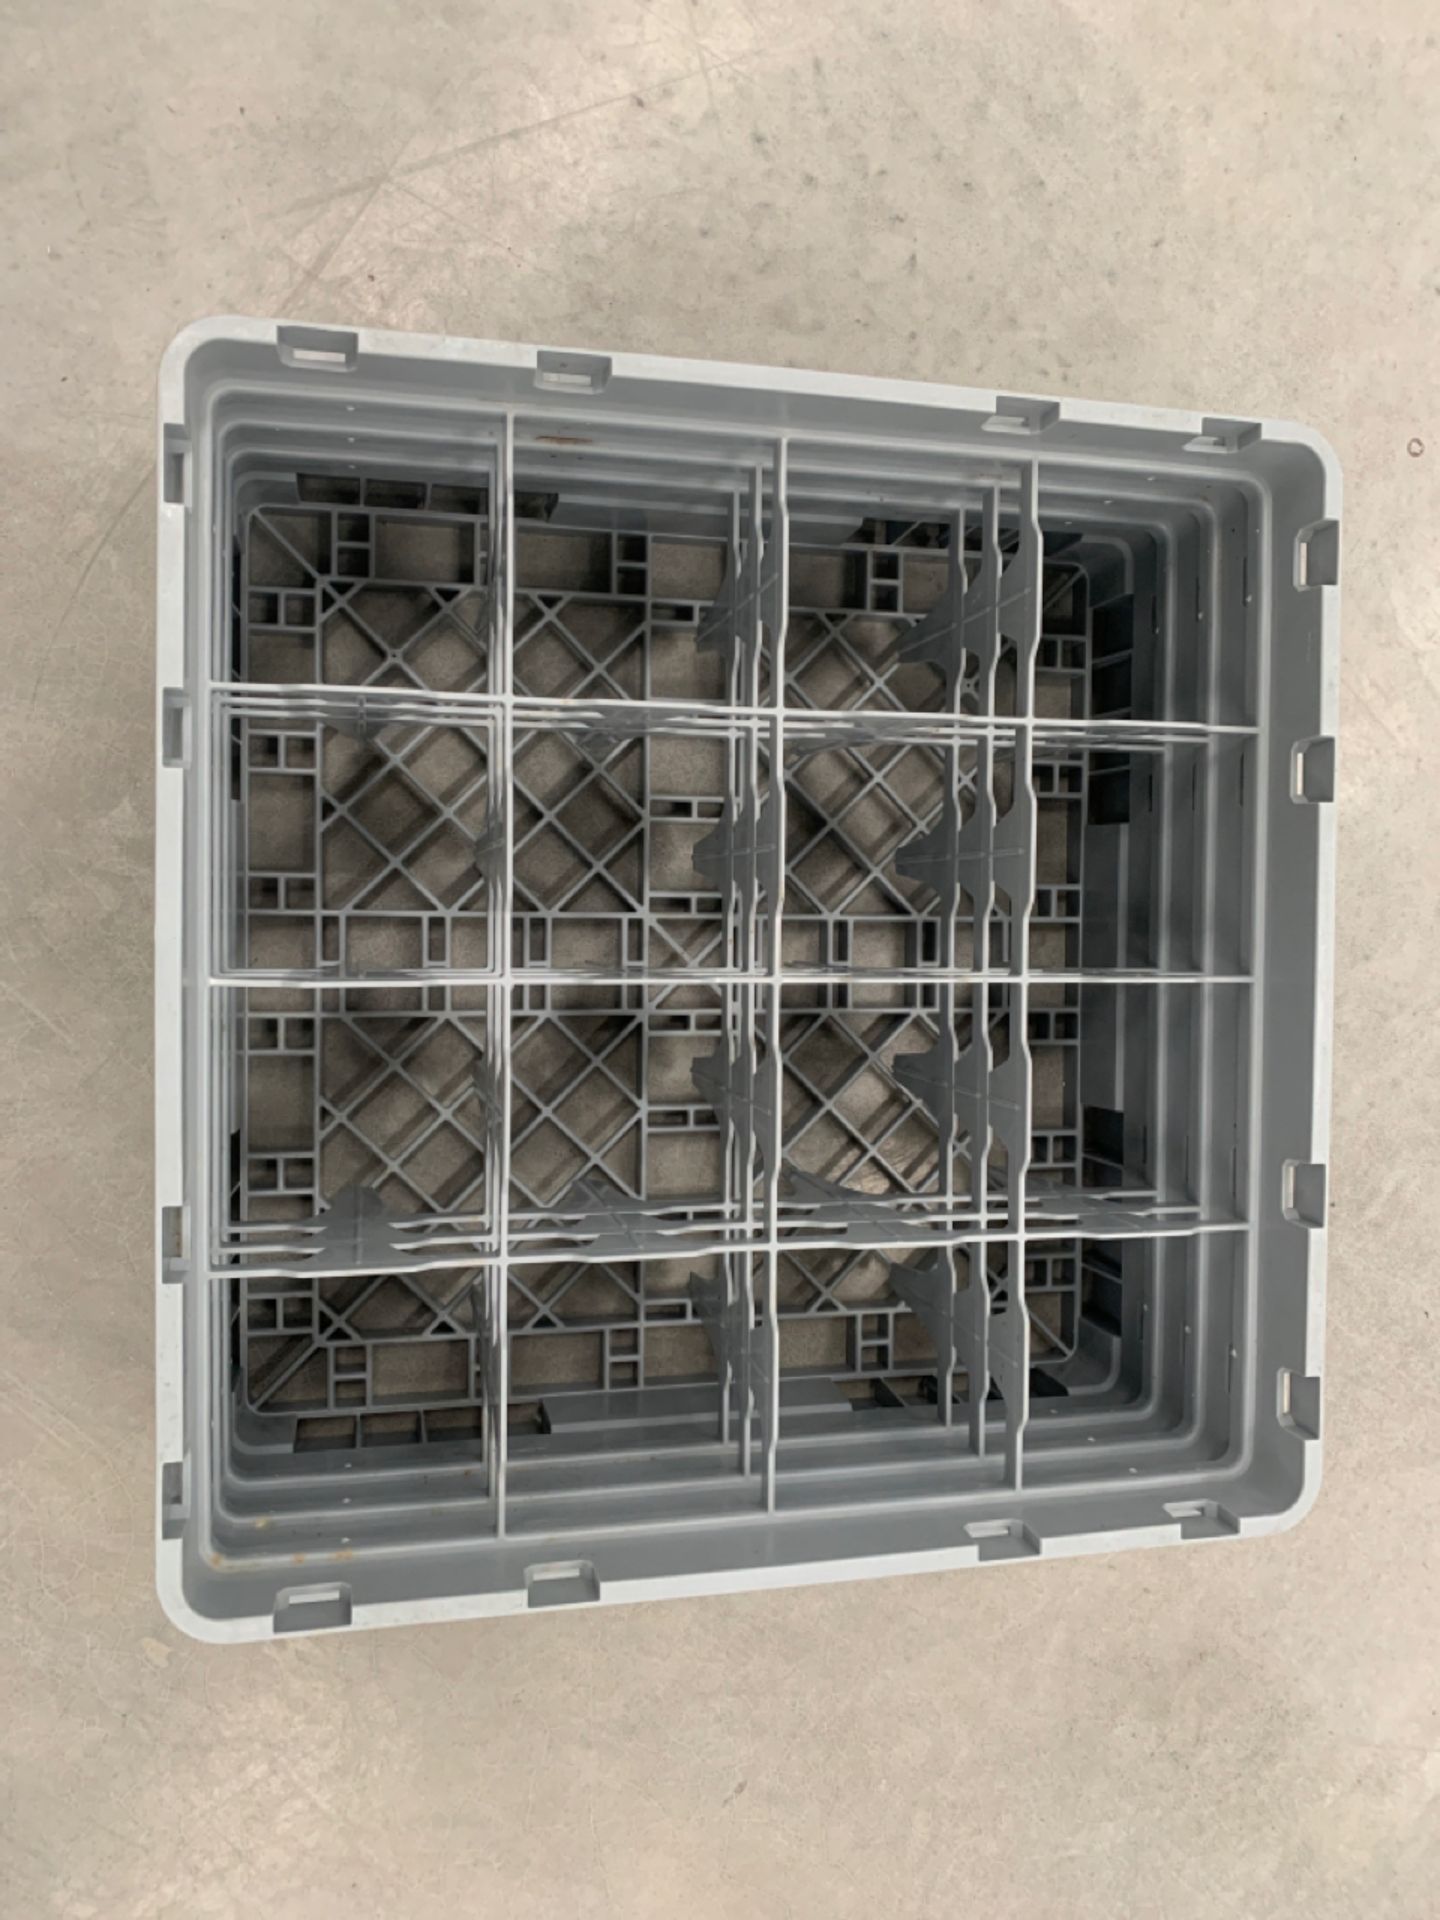 Cambro Camrack Glass Rack 16 Compartments Max Glass Height 174mm - Image 2 of 3